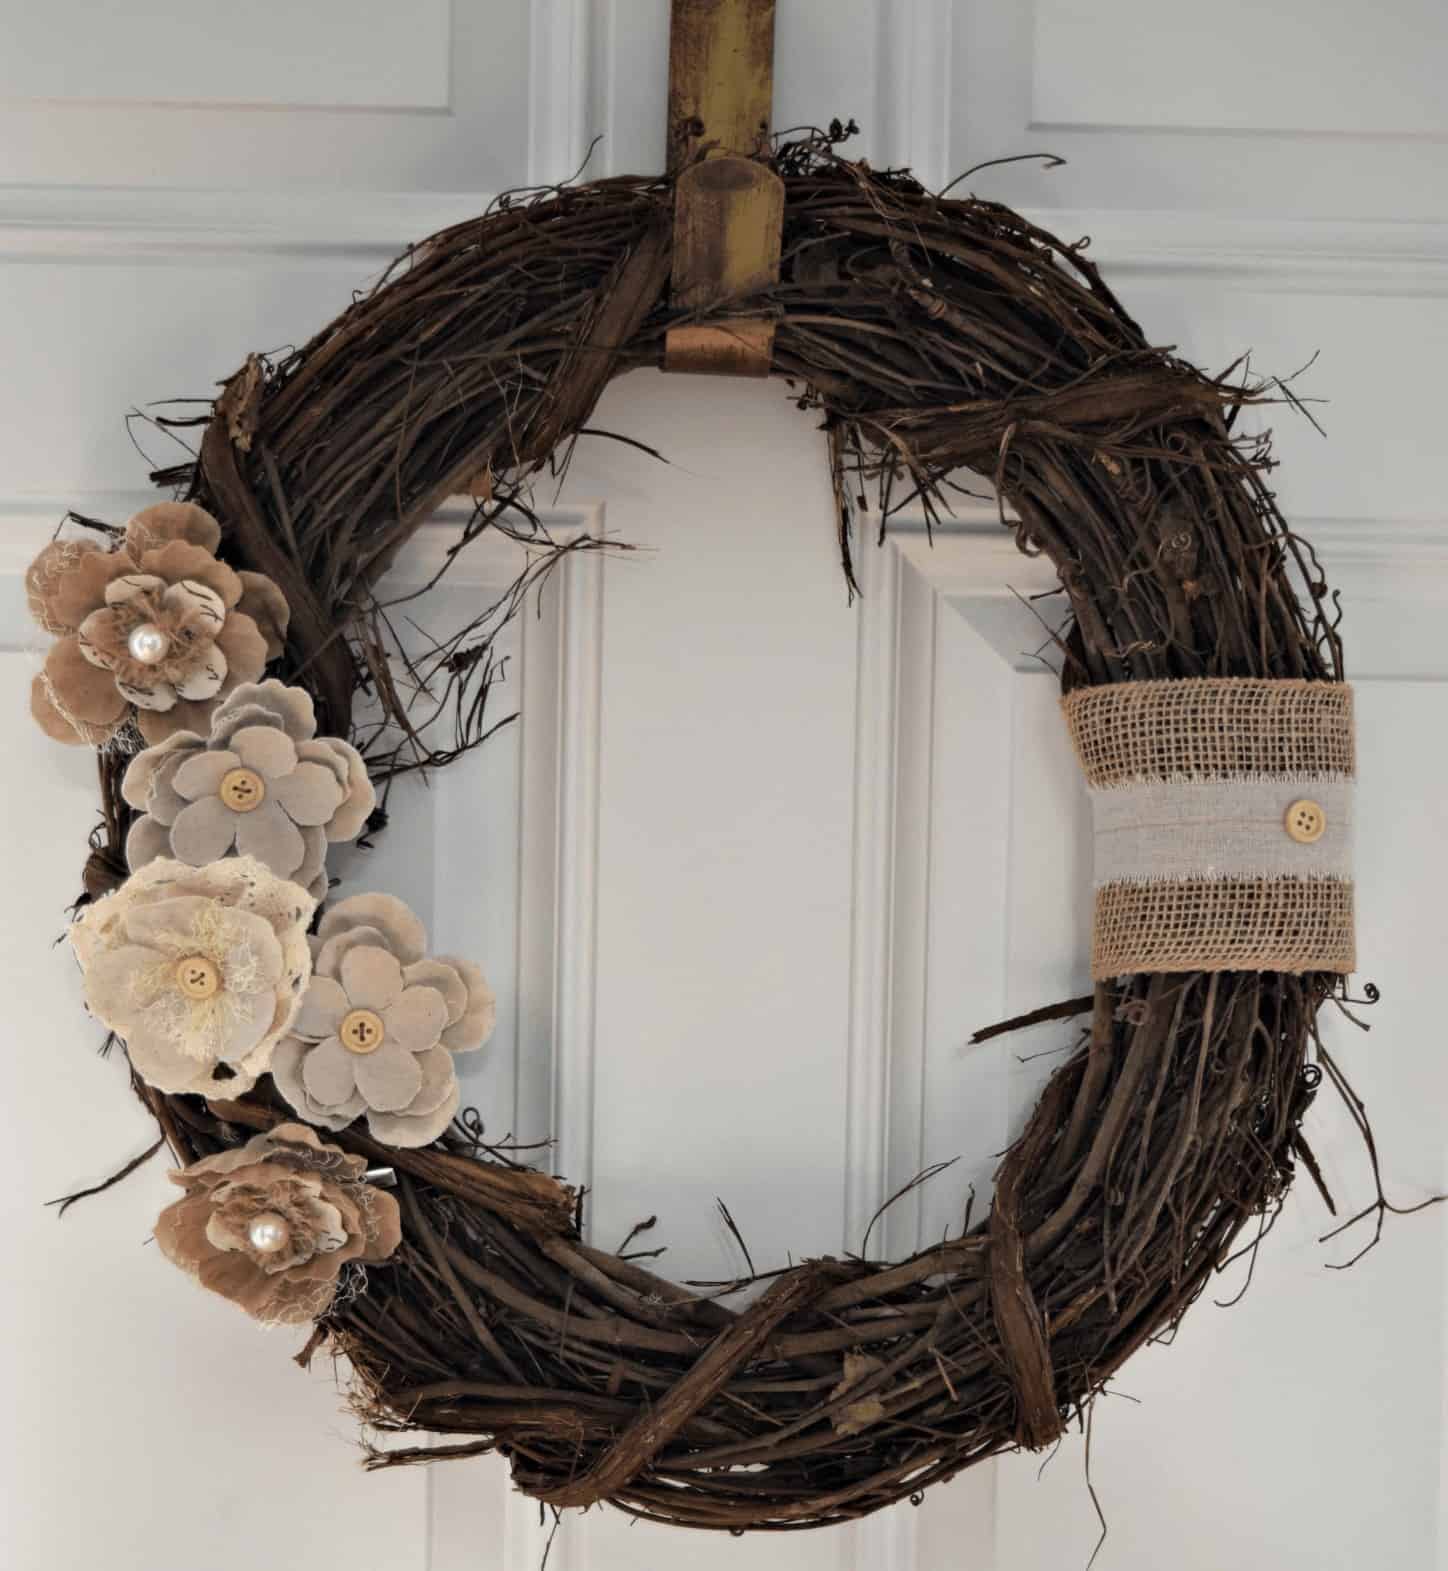 Flowers and burlap in neutral colors are a great way to decorate your front door and are a great visual way to end summer